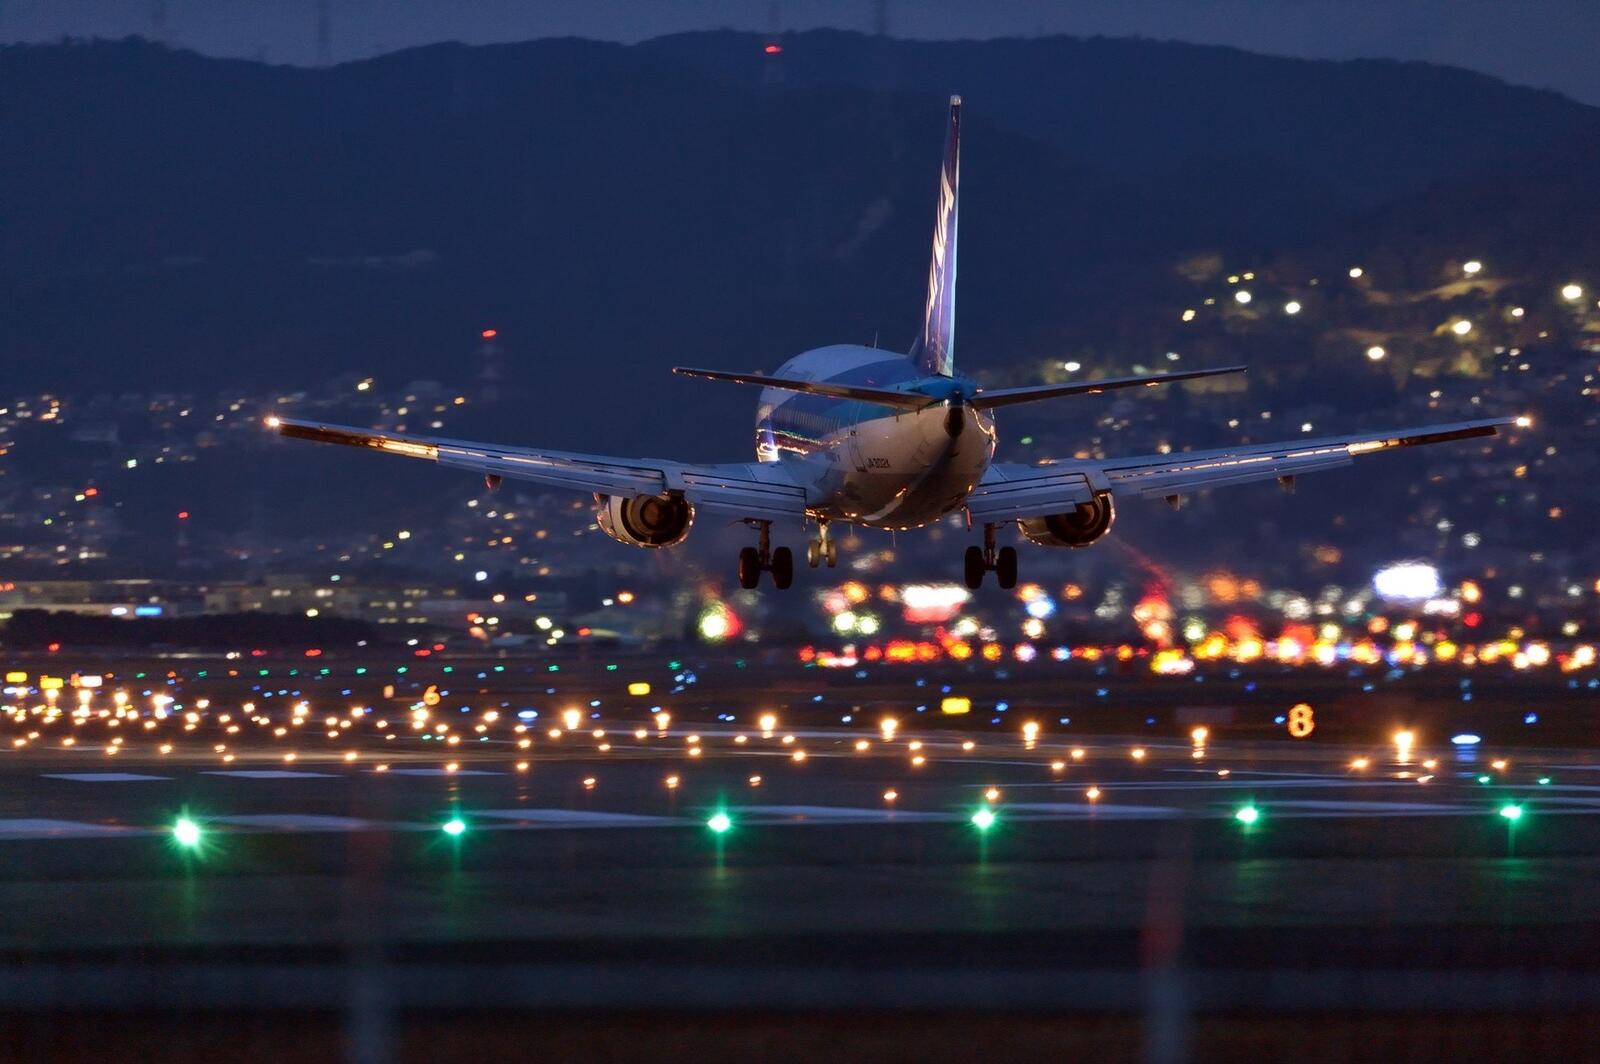 Free photo An airplane lands on the night runway